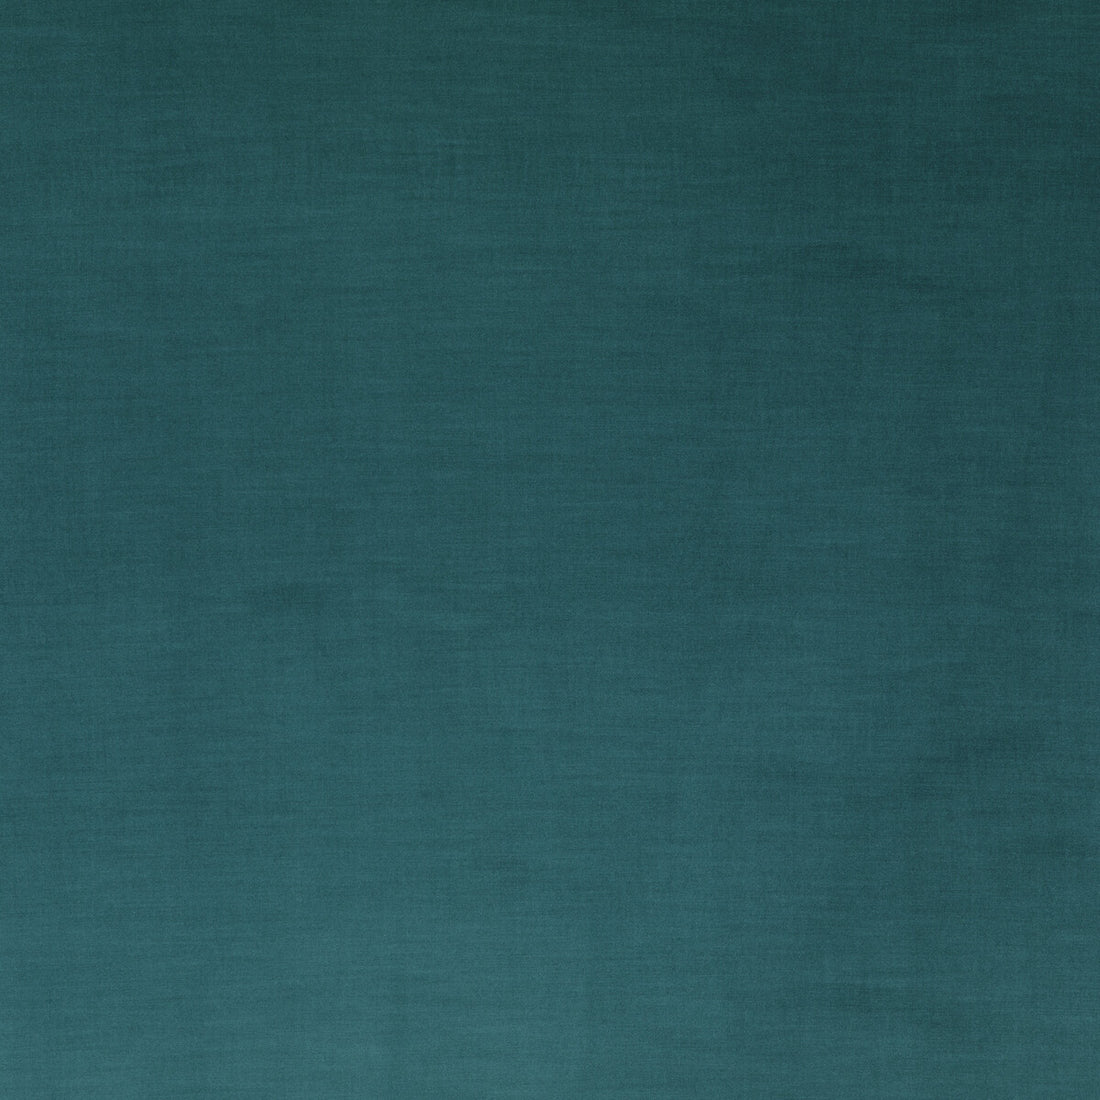 Coniston Velvet fabric in teal color - pattern BF10781.615.0 - by G P &amp; J Baker in the Coniston Velvet collection